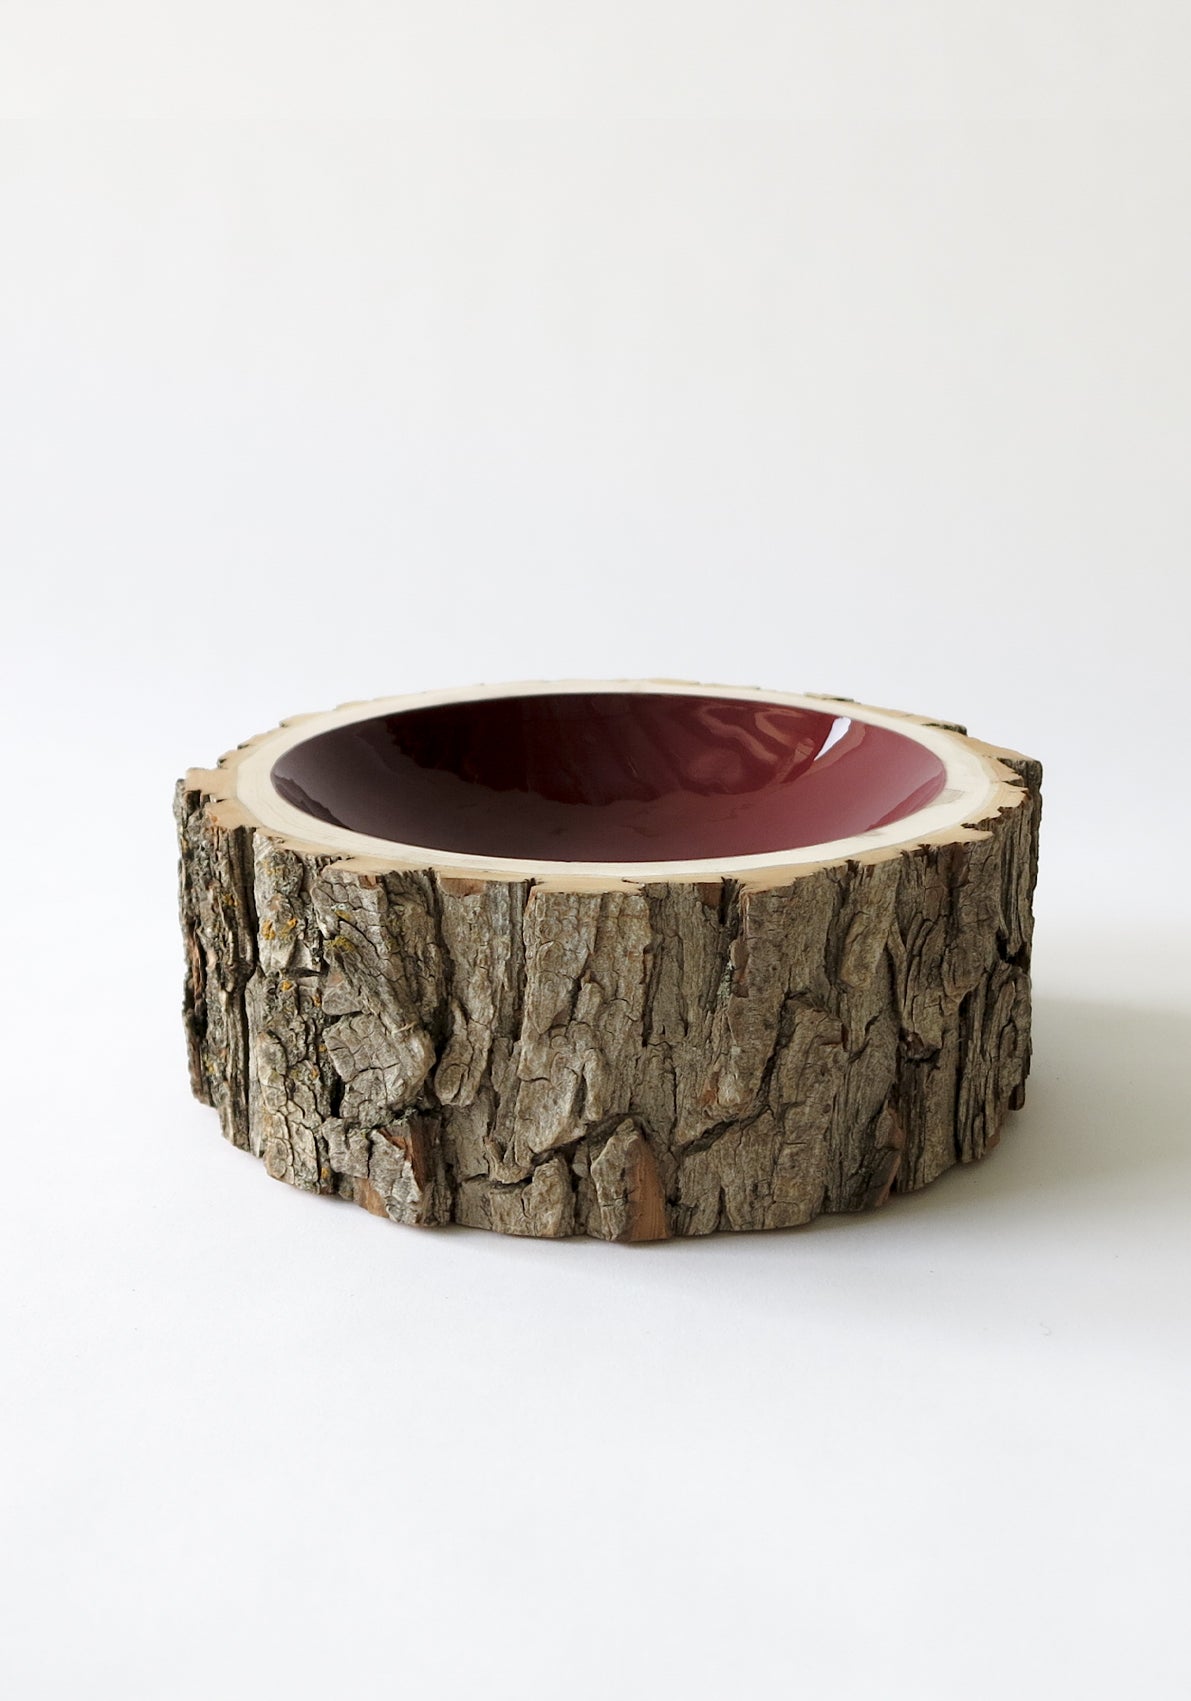 Size 8 Log Bowl - large wooden bowl with rough willow bark, glossy interior is a rick dark red wine colour.